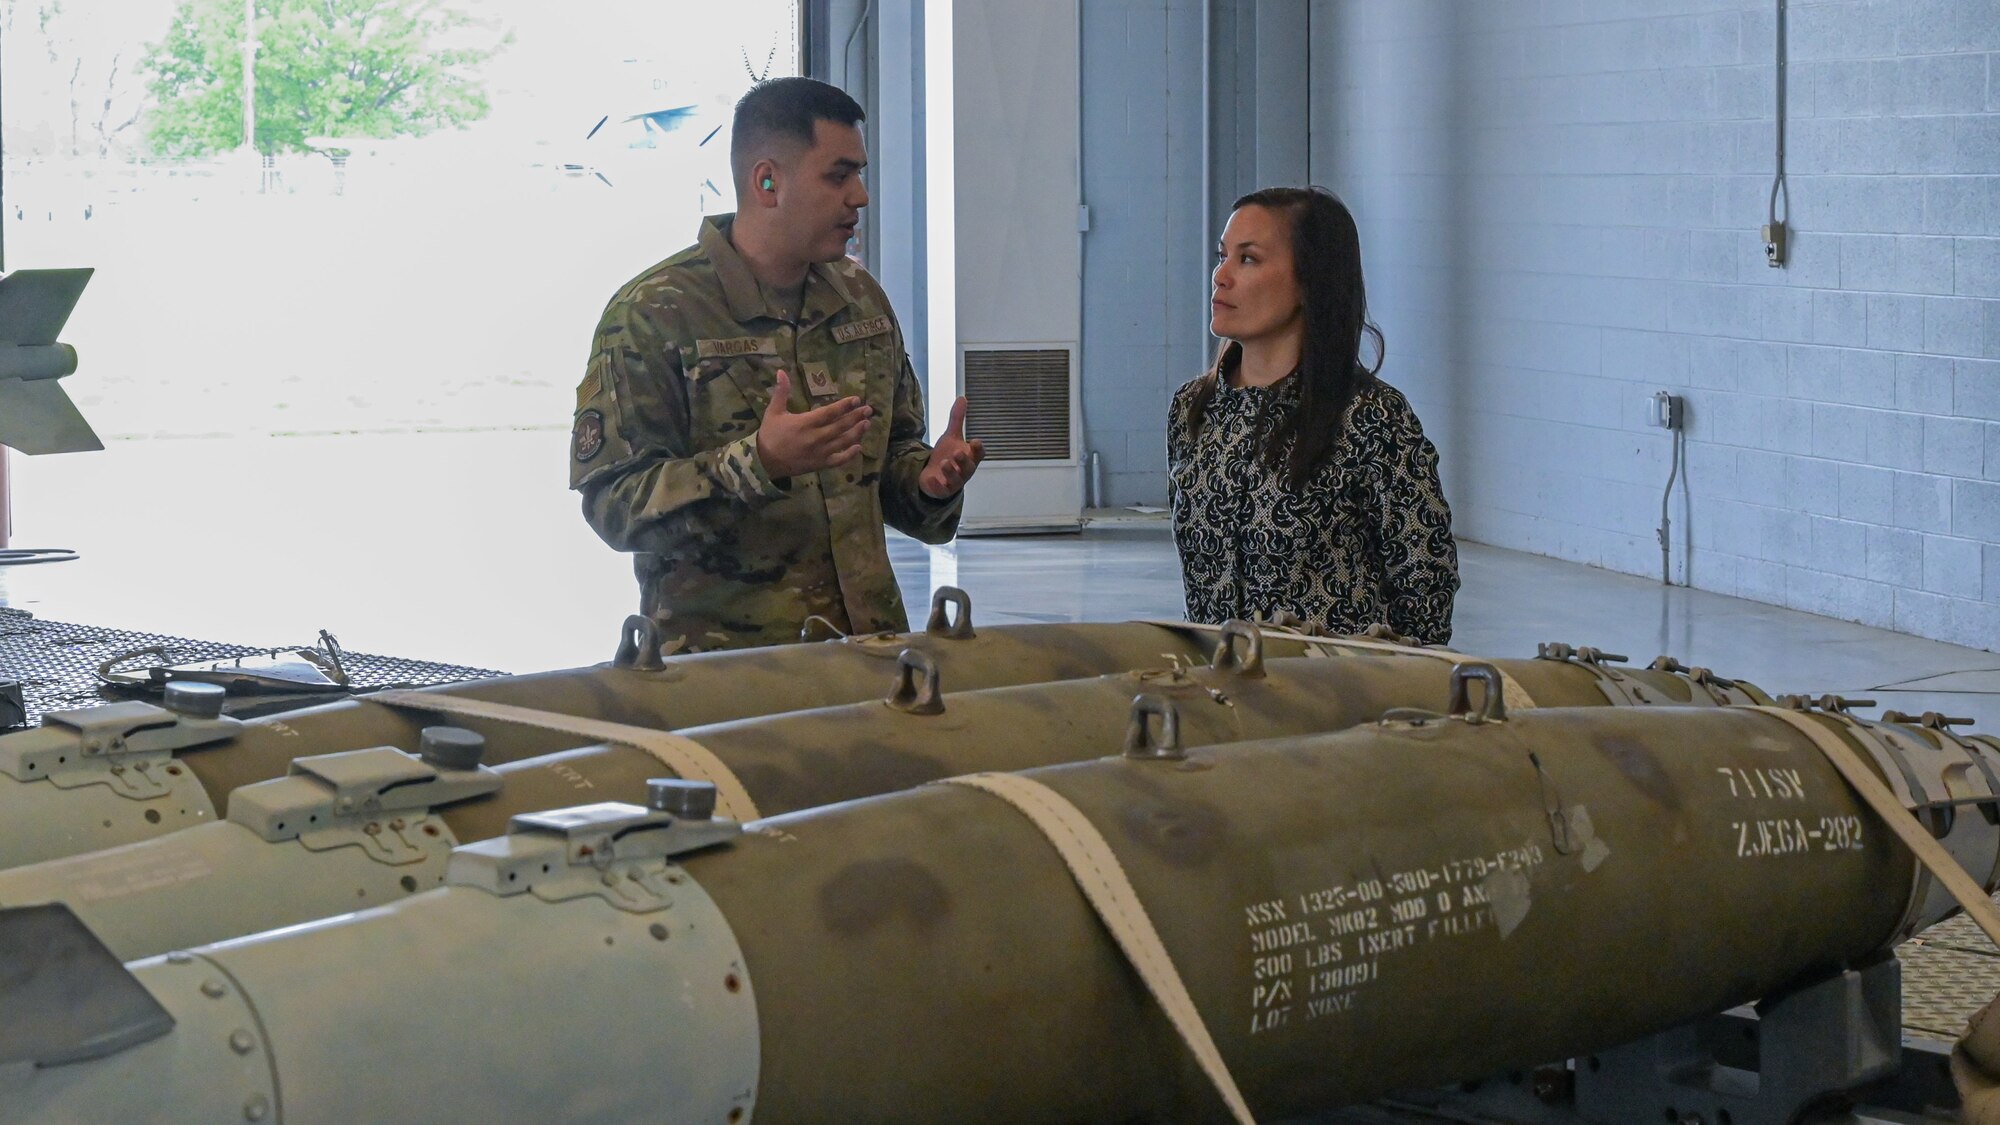 The Honorable Gina Ortiz Jones, Under Secretary of the Air Force, receives a brief by Tech. Sgt. Uriel Vargas from the 707th Maintenance Squadron at the Tech Sgt. Joshua Kidd’s Weapons Load Training Facility during a visit to Barksdale Air Force Base, Louisiana, April 12, 2022. Tech Sgt. Joshua Kidd’s Weapons Load Training Facility was named after Tech. Kidd, a 2nd Maintenance Group, loading standardization crew chief who was shot and killed outside of his house in Bossier City, Louisiana. (U.S. Air Force photo by Senior Airman Jonathan E. Ramos)